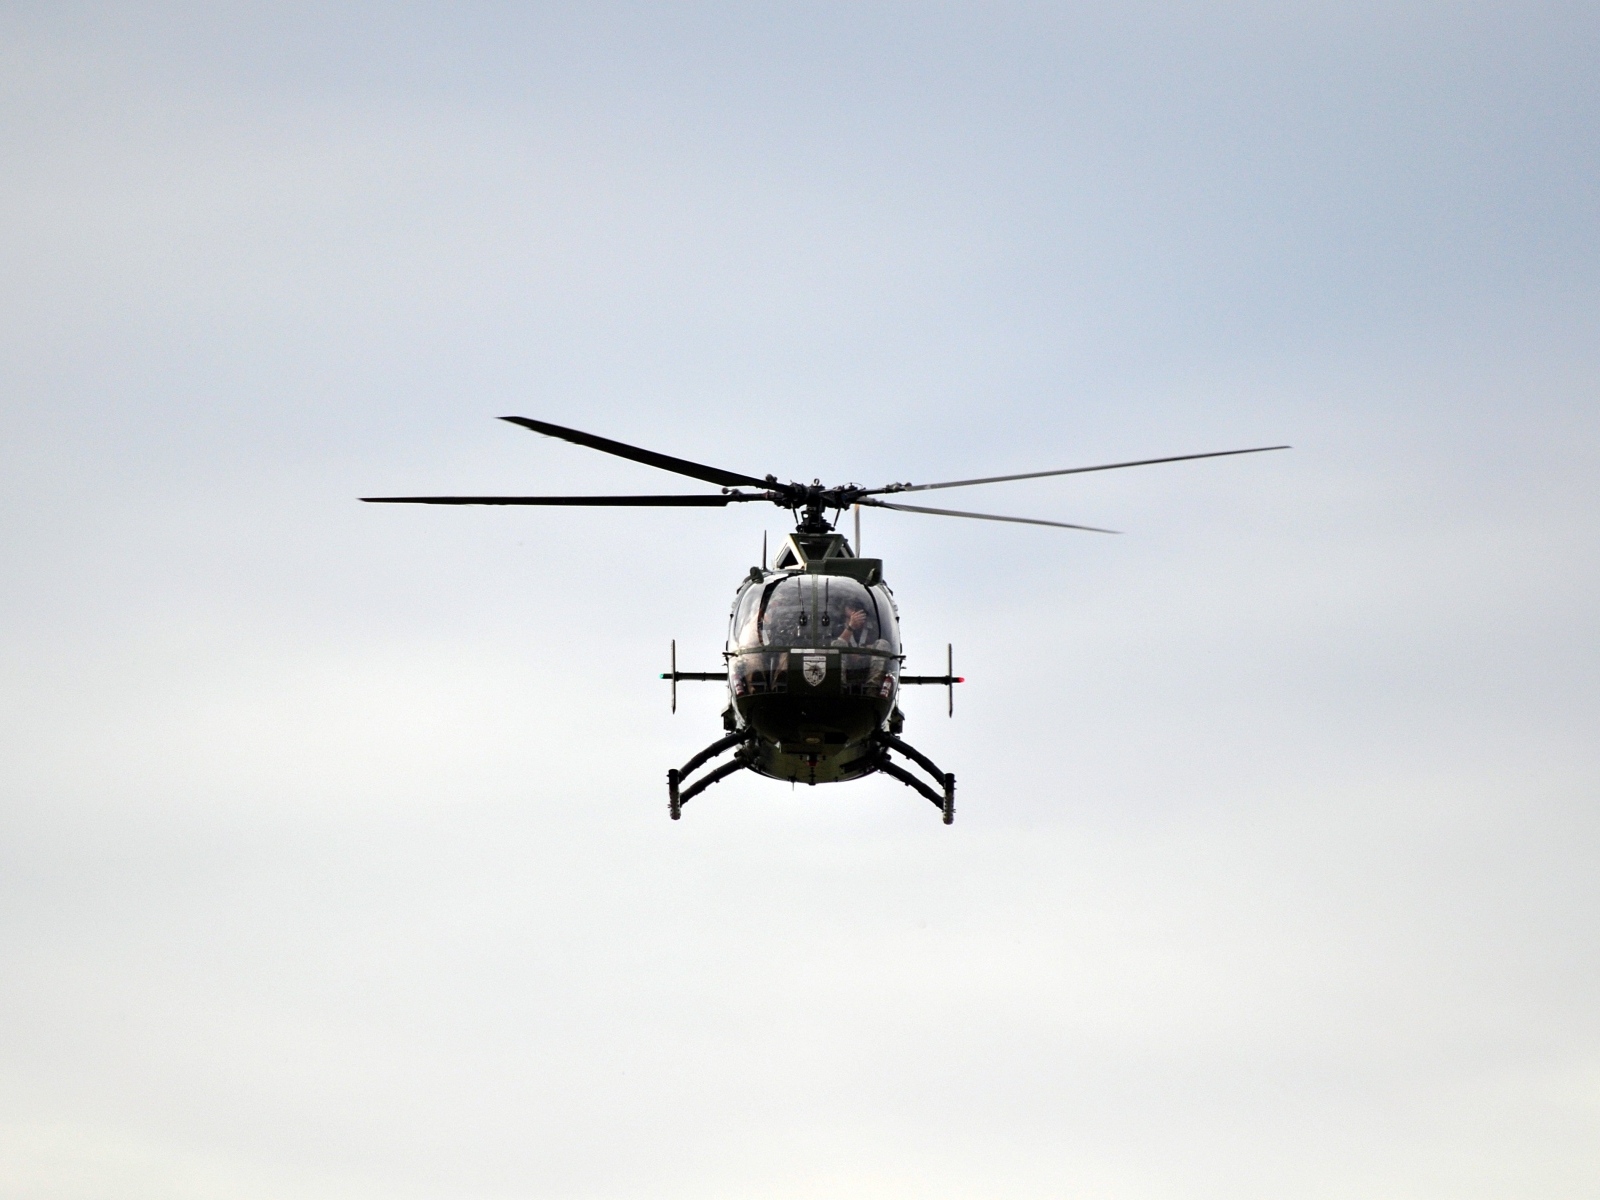 Big black helicopter flies in the sky